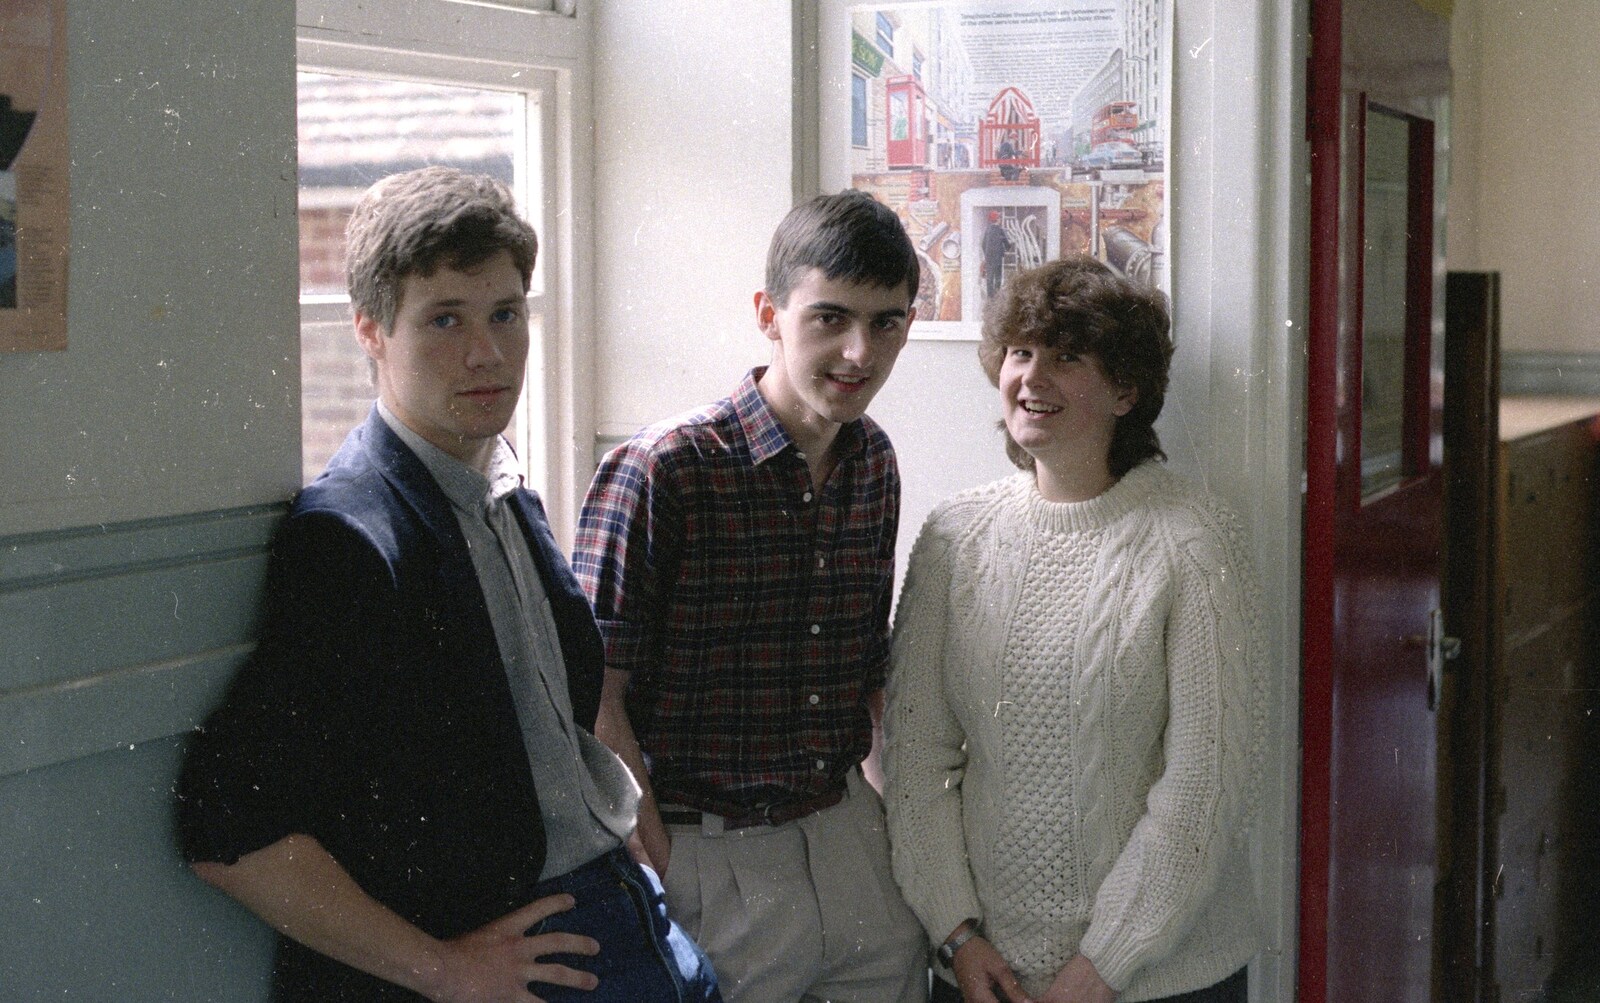 Tim, Robert and Lise outside our Physics classroom from Brockenhurst College Exams and Miscellany, Barton on Sea, Hampshire - 10th June 1985